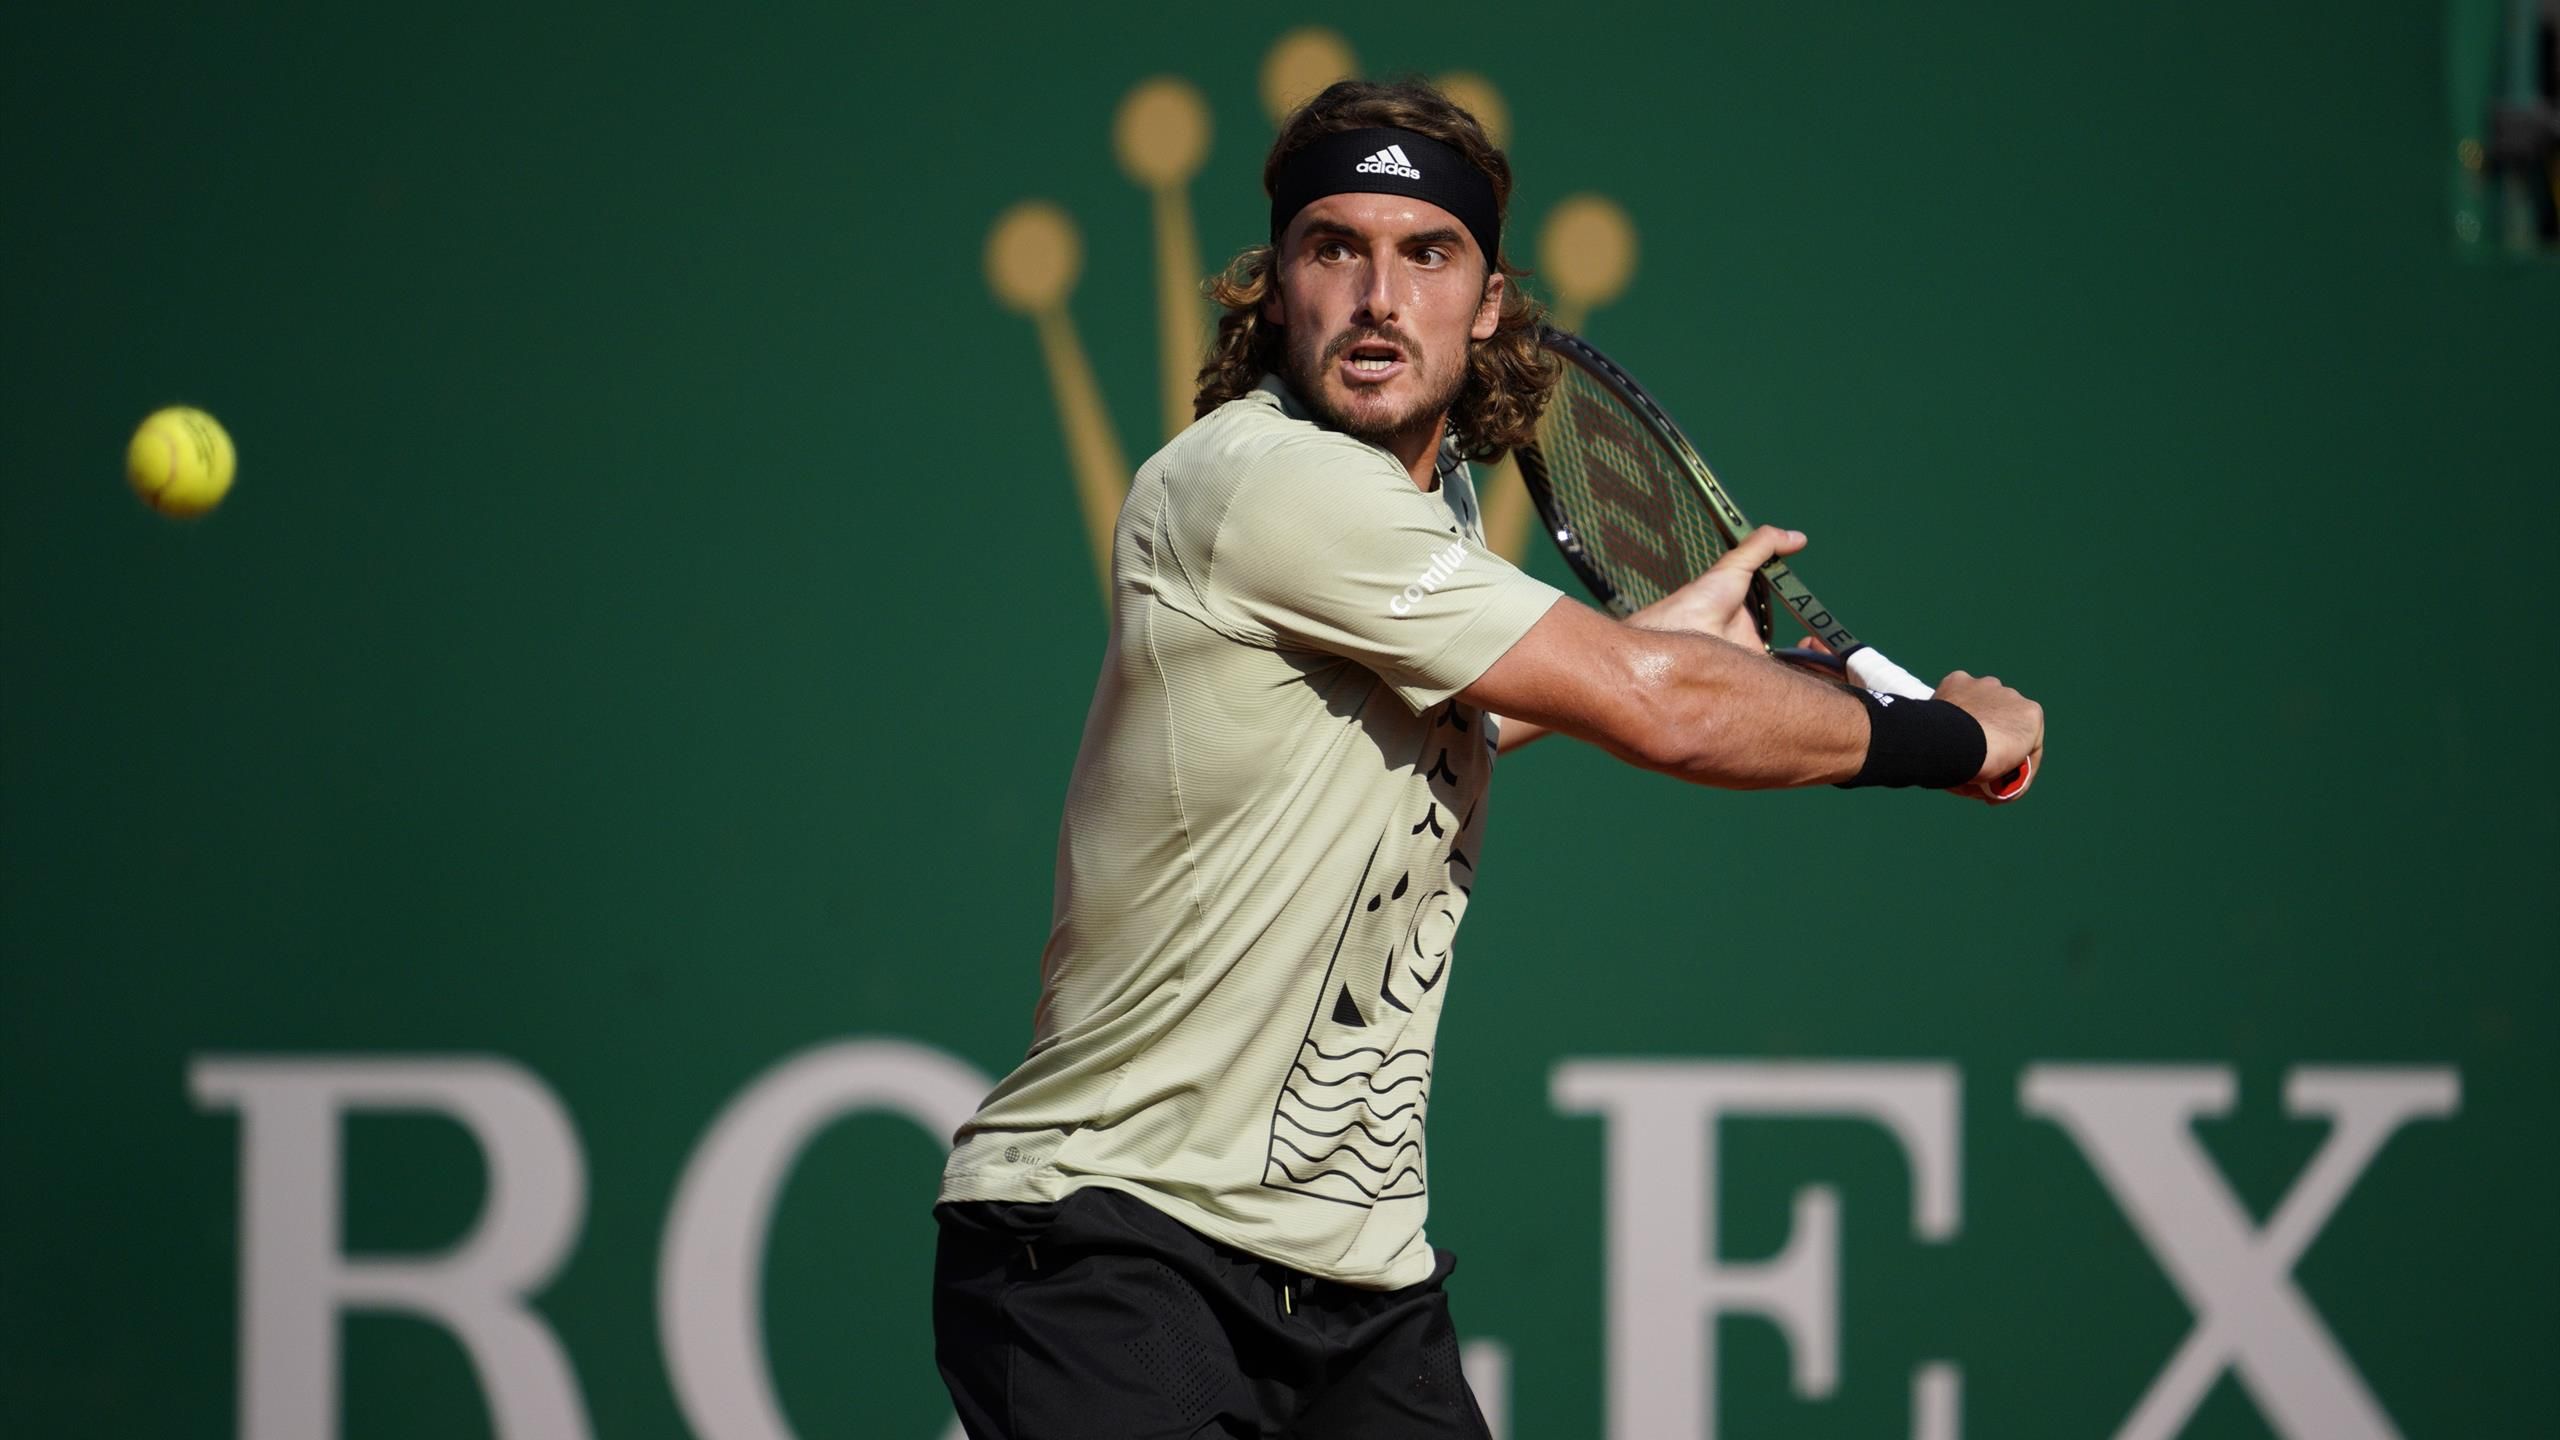 Stefanos Tsitsipas put soul out there in win over Alexander Zverev to reach Monte Carlo final